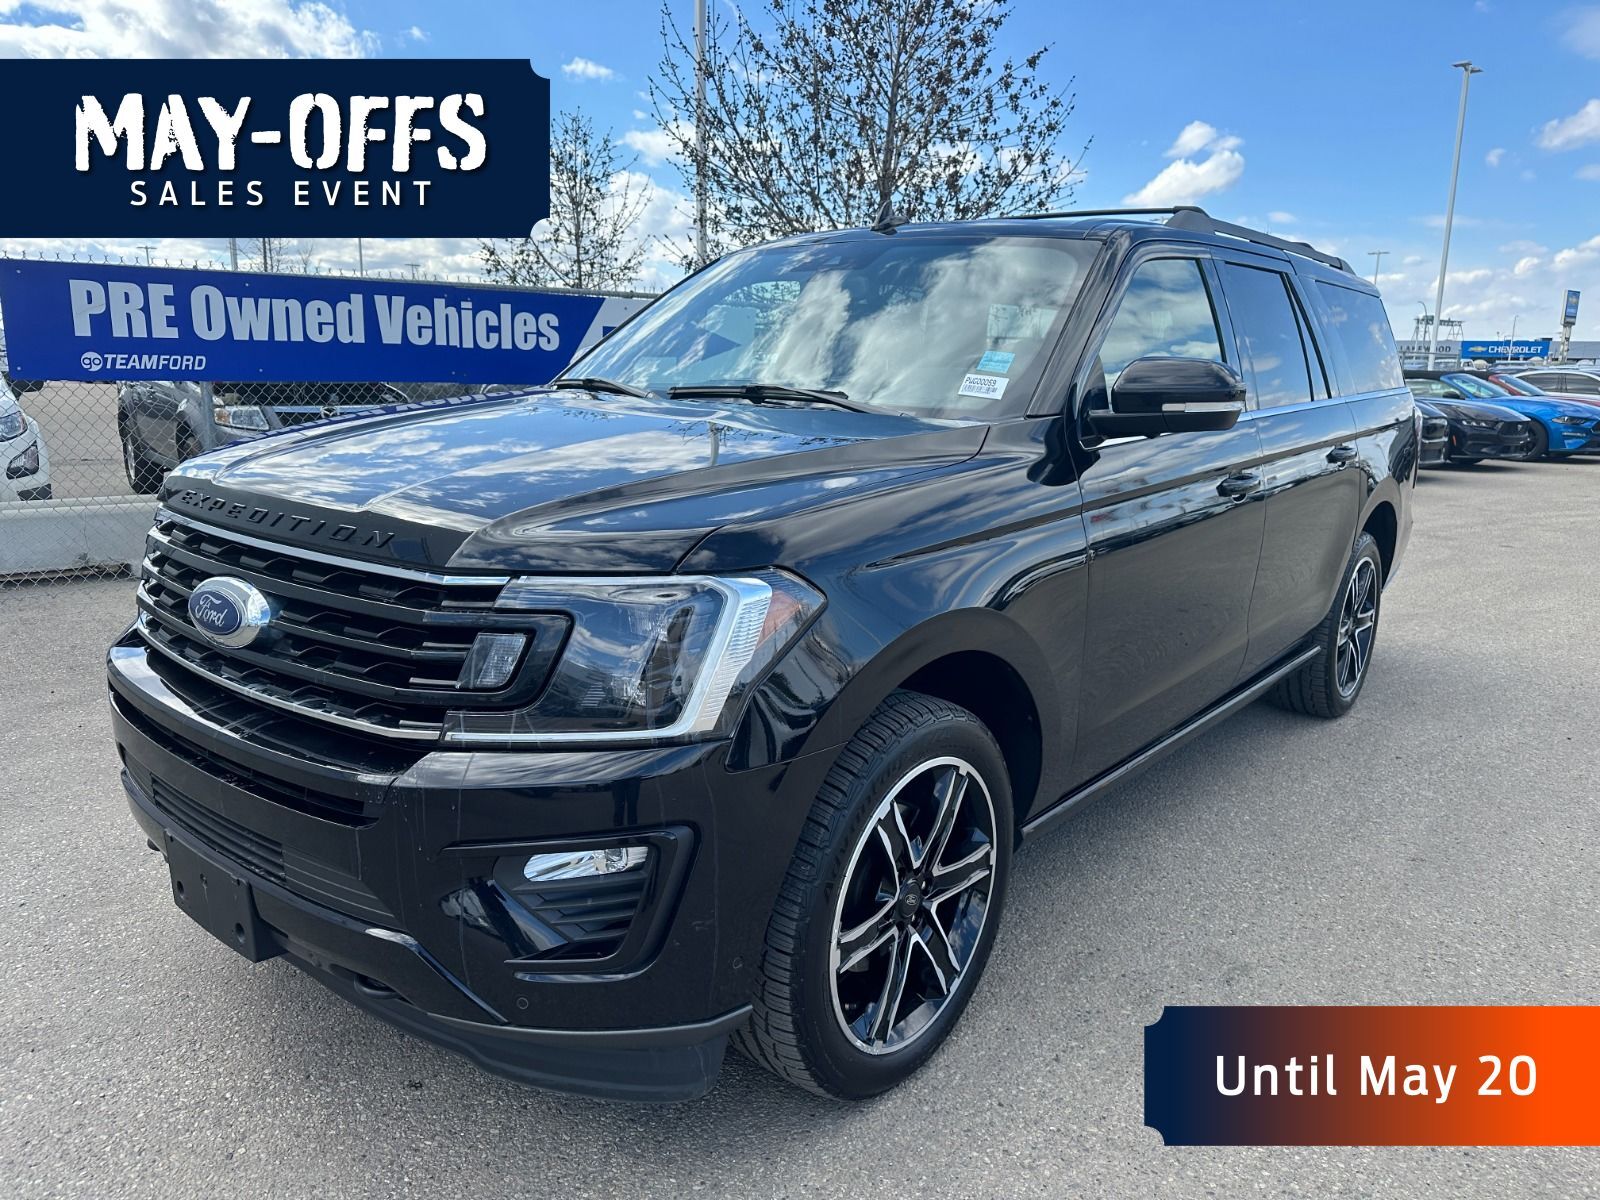 2021 Ford Expedition 3.5L V6 ECOBOOST ENG, LIMITED, CONVENIENCE PKG, FO